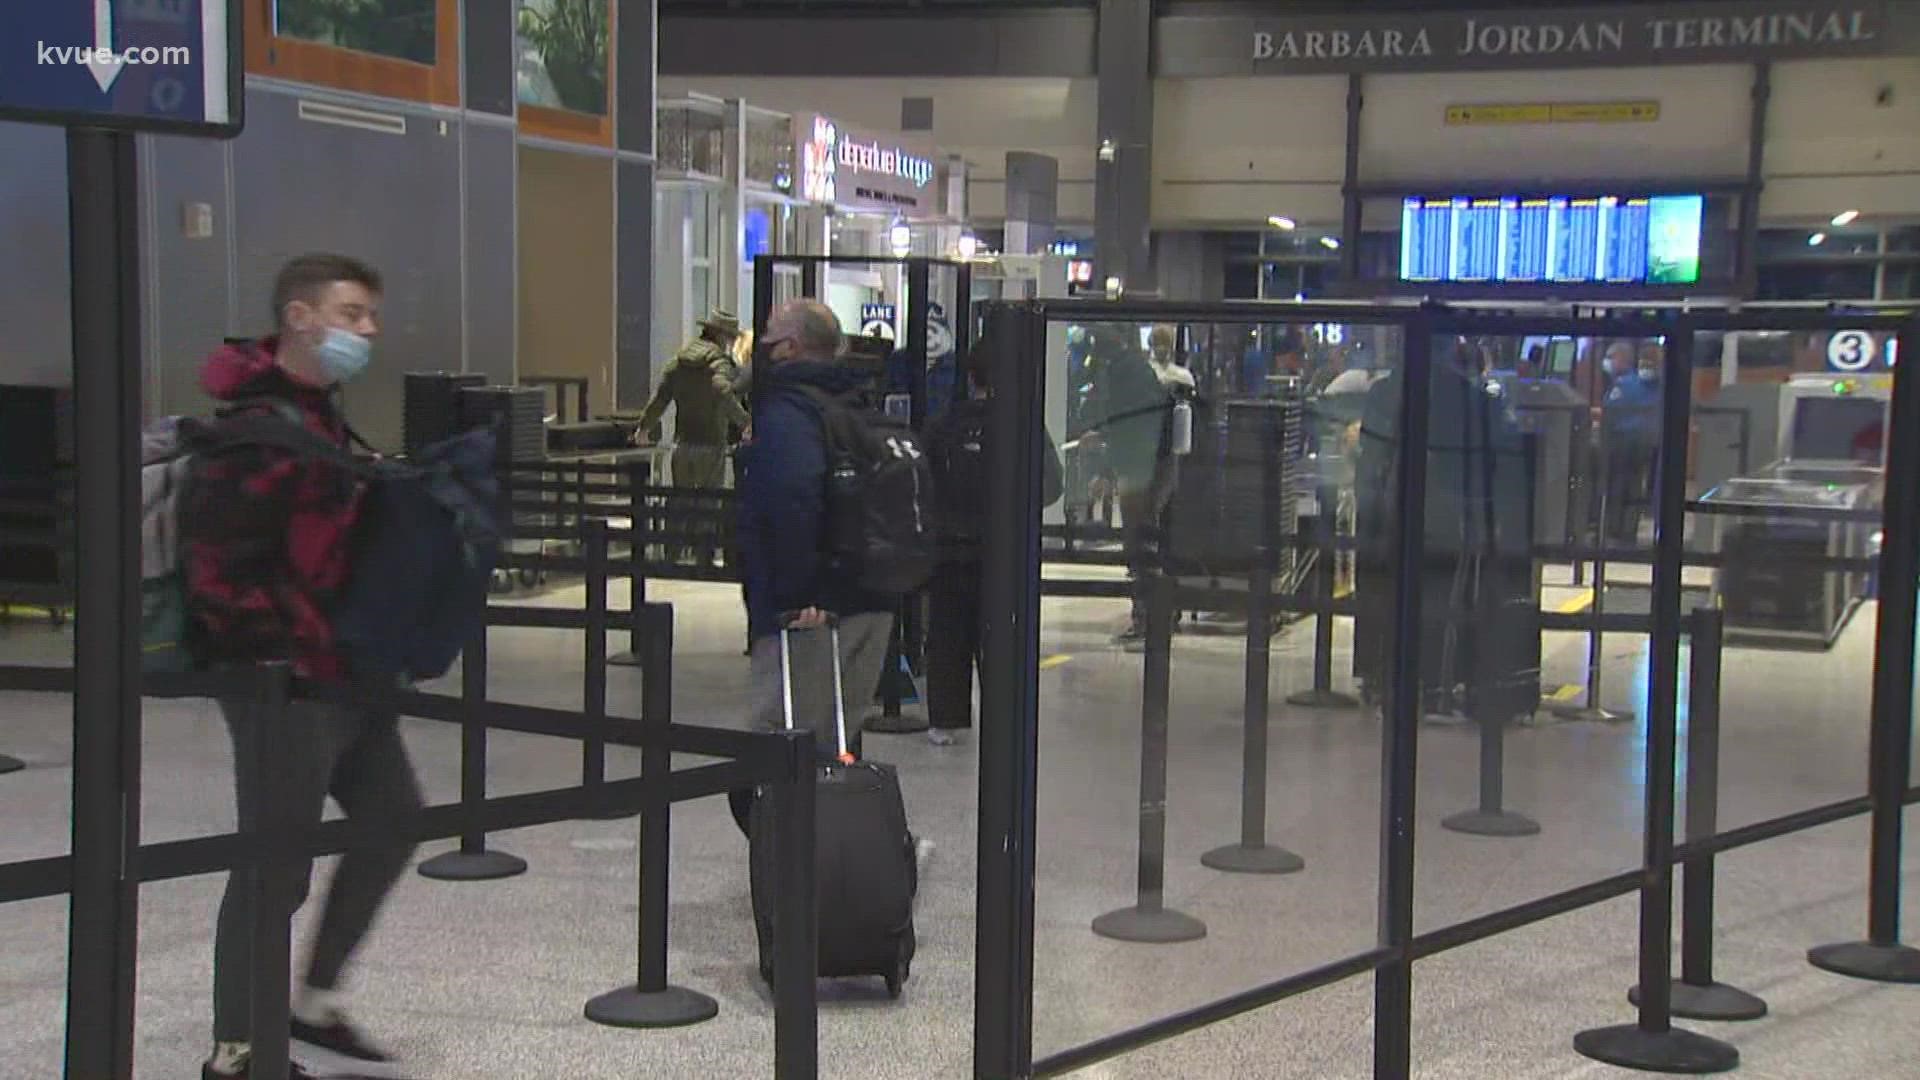 If you're taking off from Austin's airport anytime soon, you may be able to get through security lines a lot quicker.